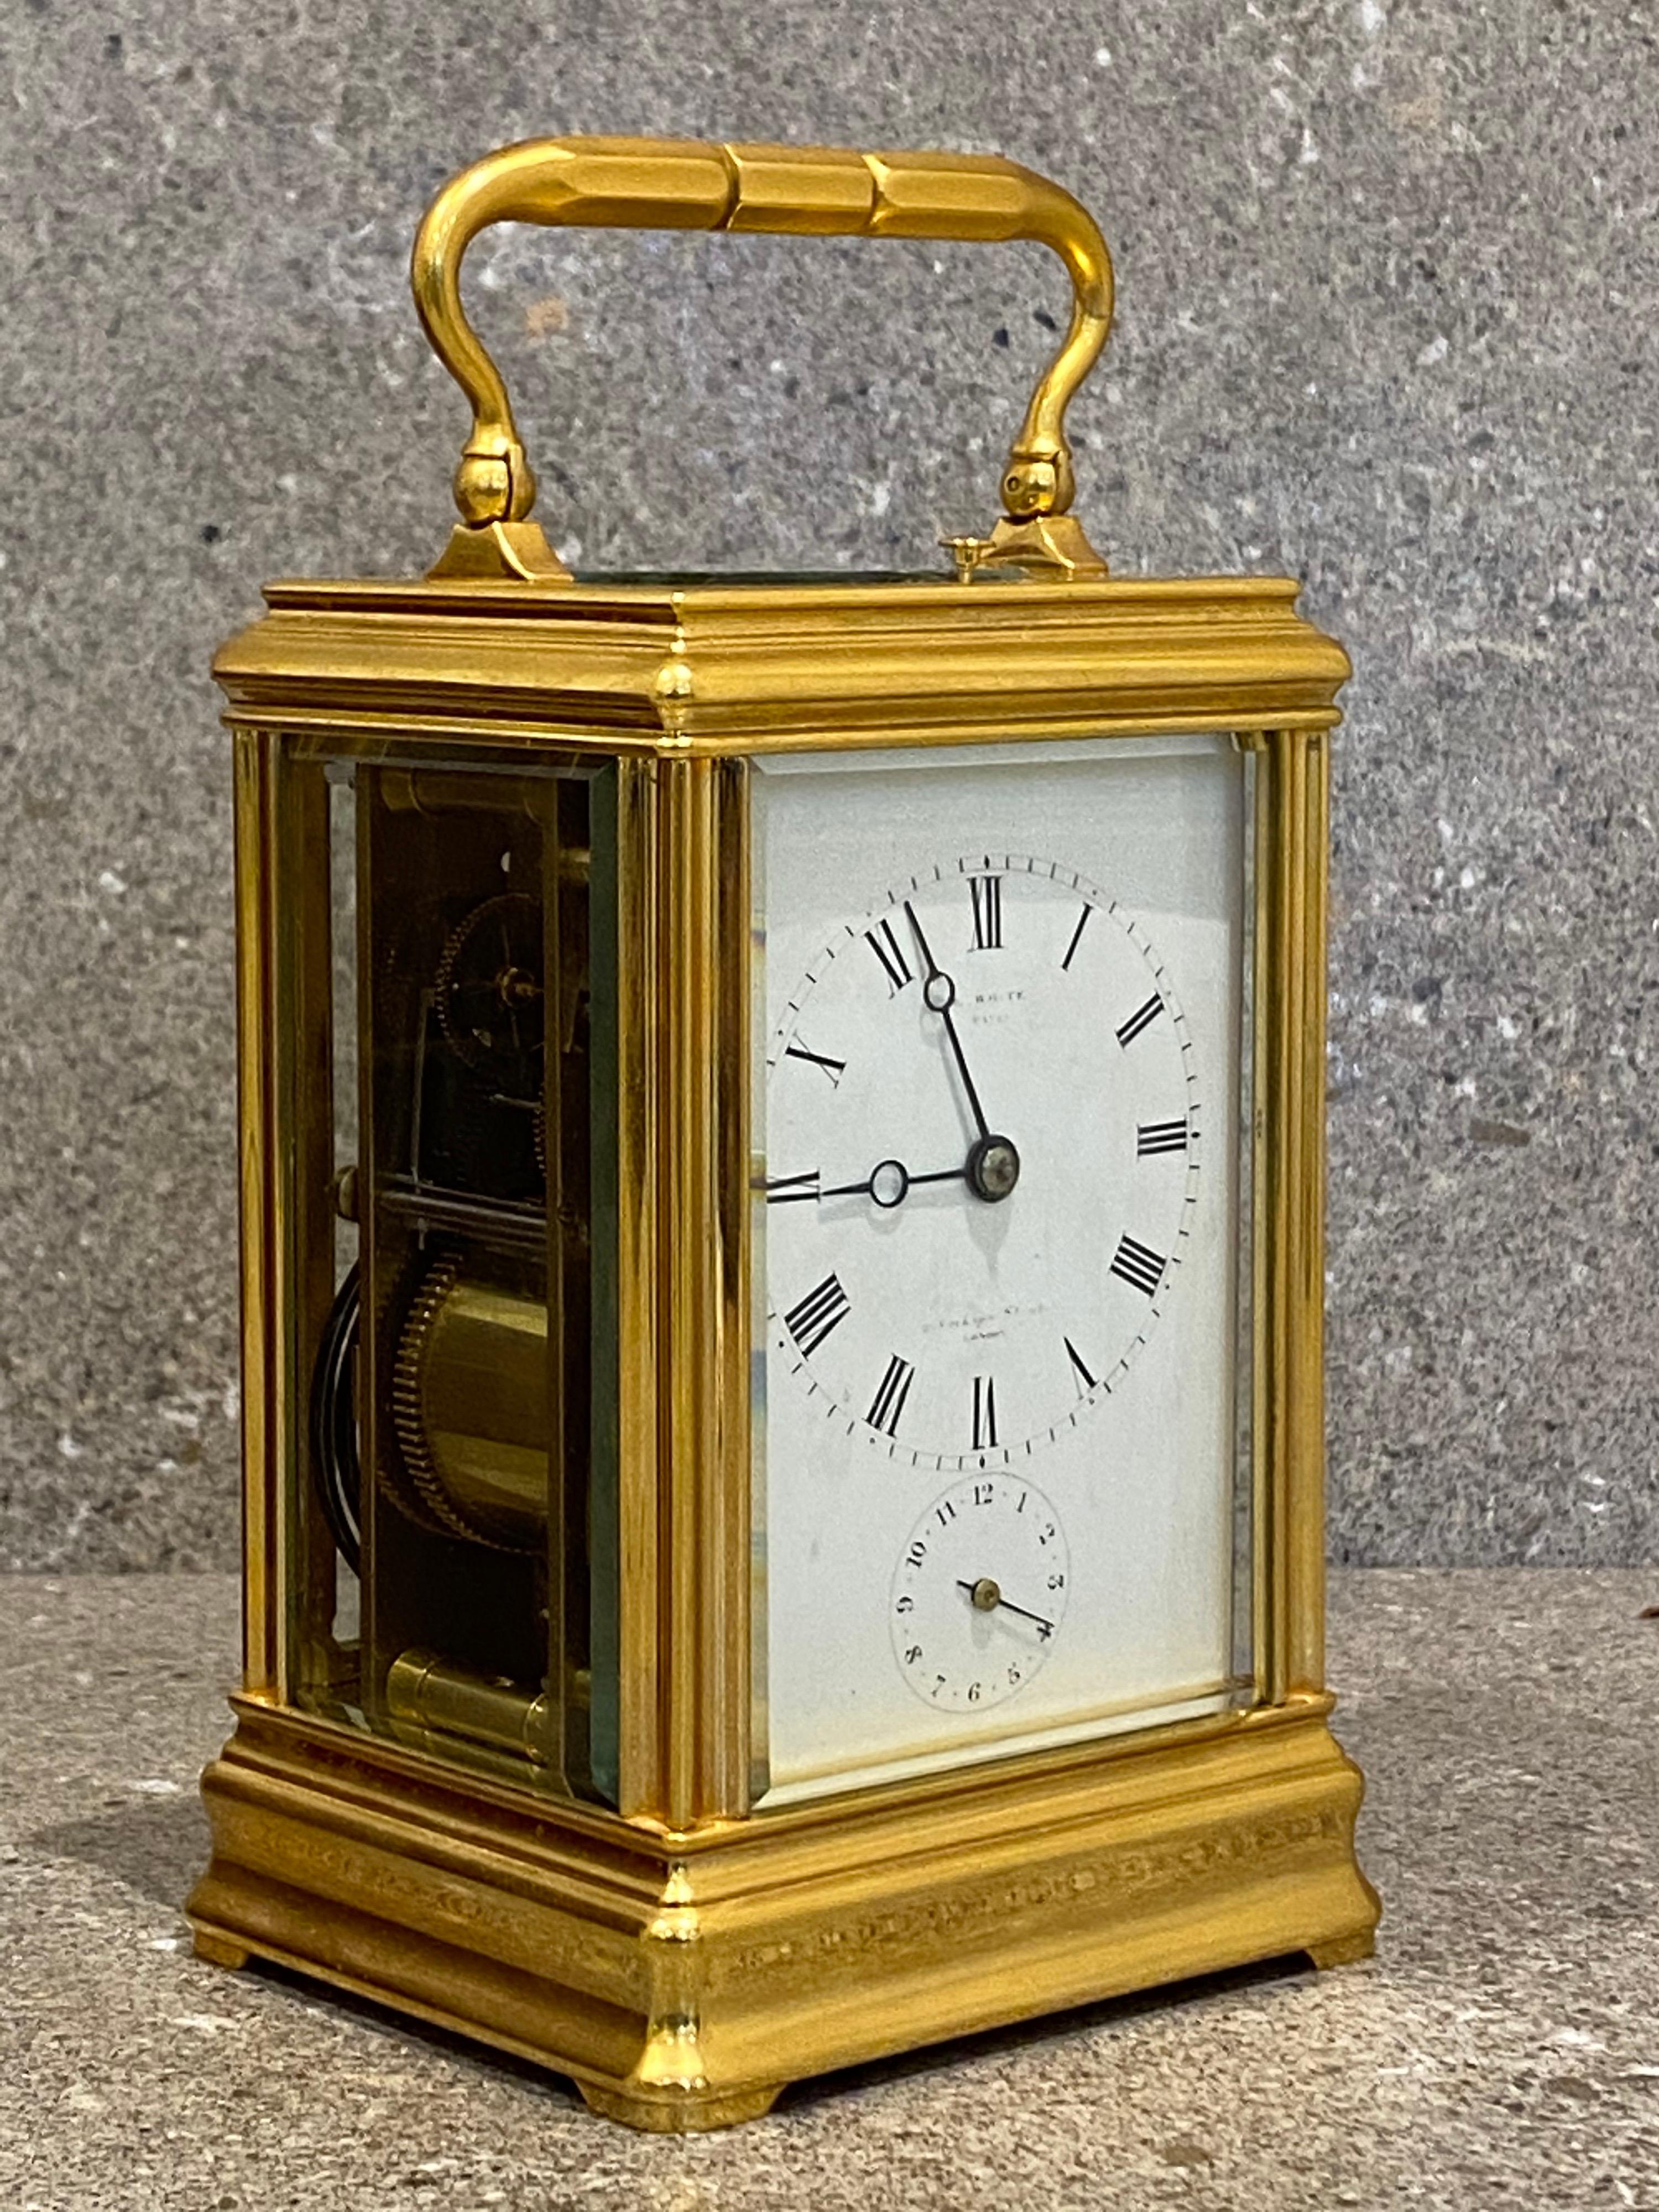 This gorge styled carriage clock was made by Drocourt for E. White in c.1870, at a time when Edward White had a well-deserved reputation for making and retailing clocks of the premier league. It retains its original numbered leather carrying